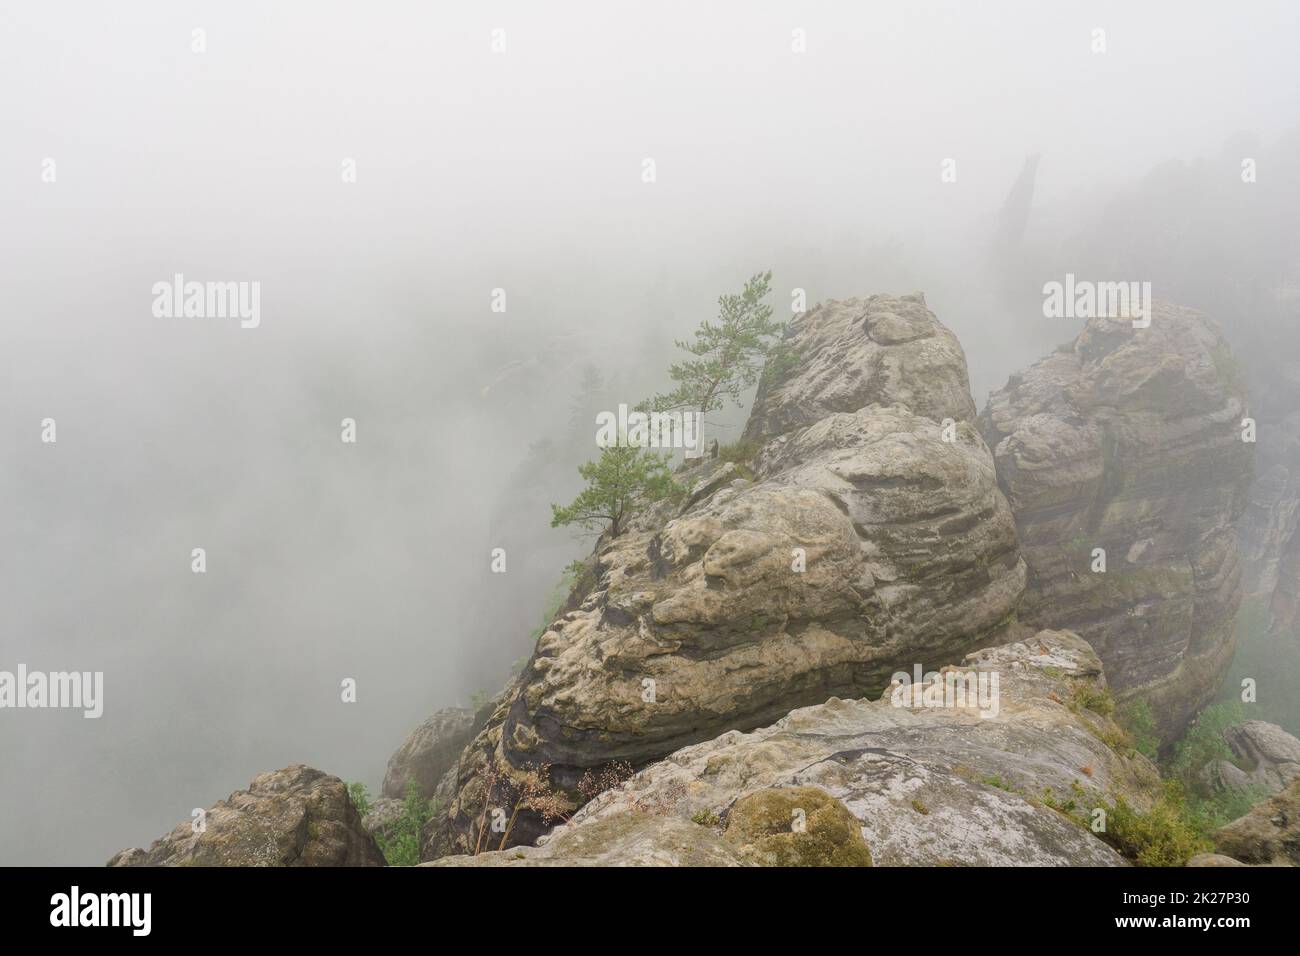 An early cloudy morning in mountain. Schrammsteine - group of rocks are a long, strung-out, very jagged in the Elbe Sandstone Mountains located in Saxon Switzerland in East Germany. Stock Photo